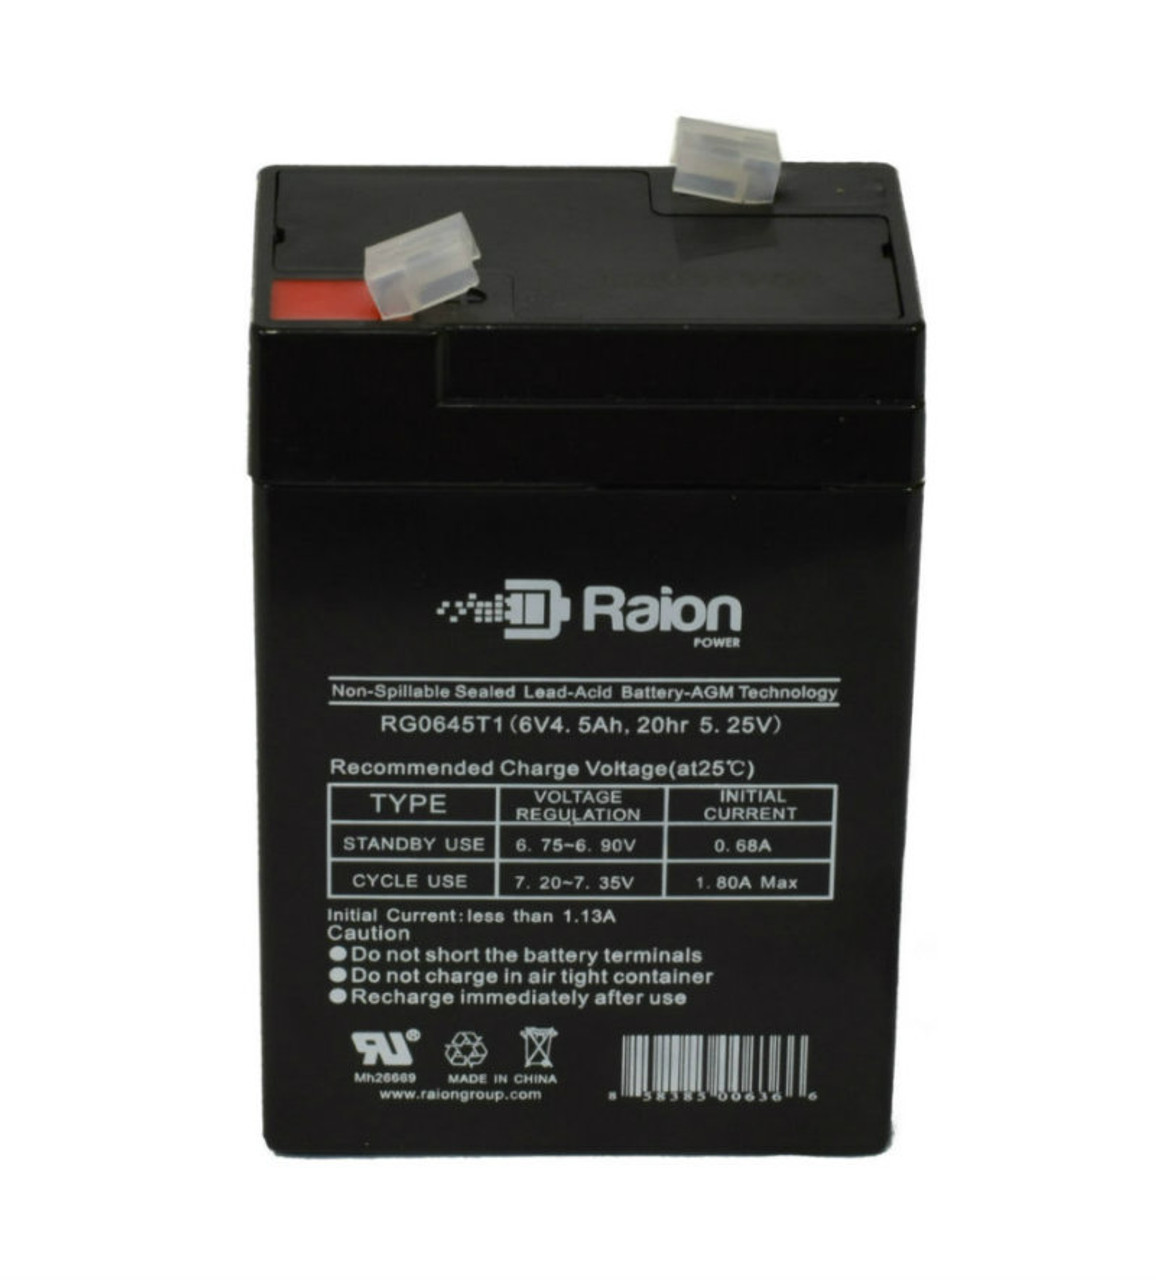 Raion Power RG0645T1 Replacement Battery Cartridge for Chiway SJ6V5Ah